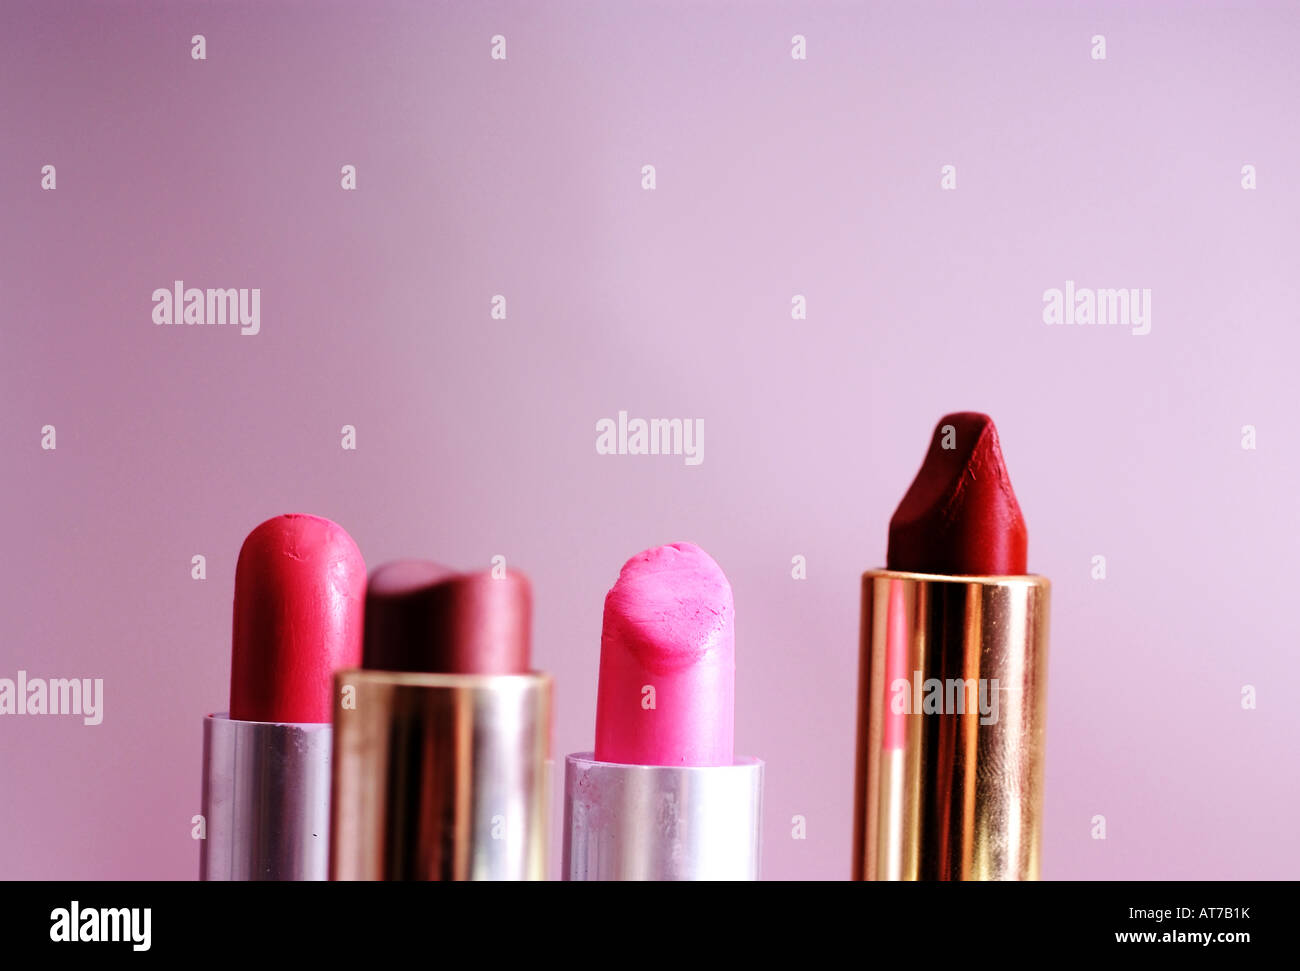 A picture of 4 lipsticks Stock Photo